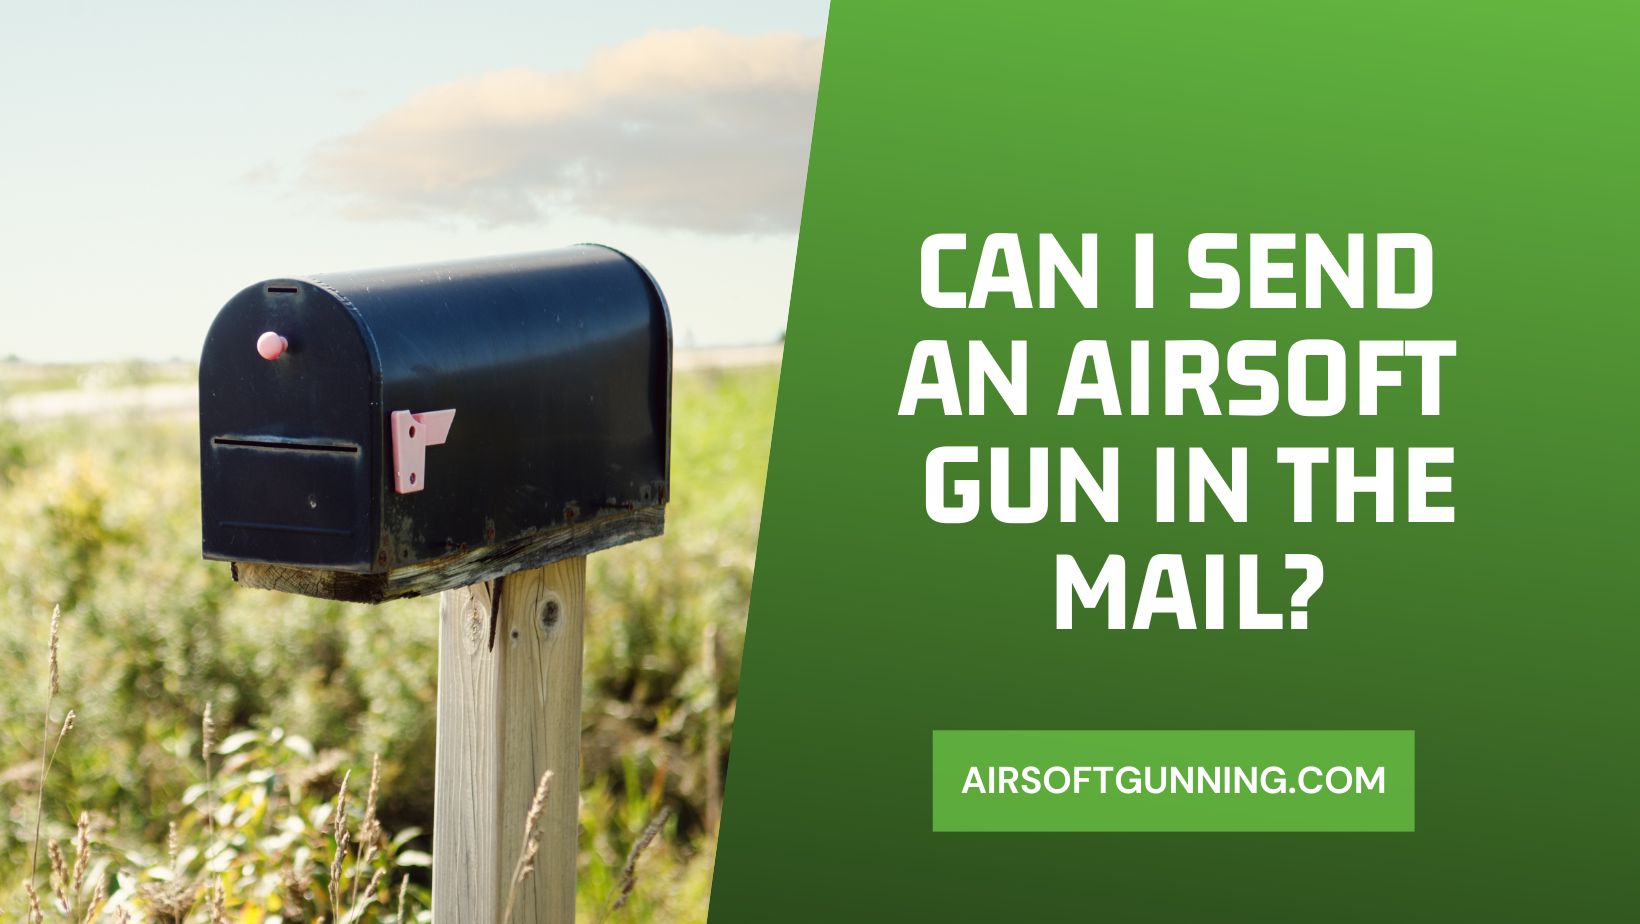 Can I Send an Airsoft Gun in the Mail